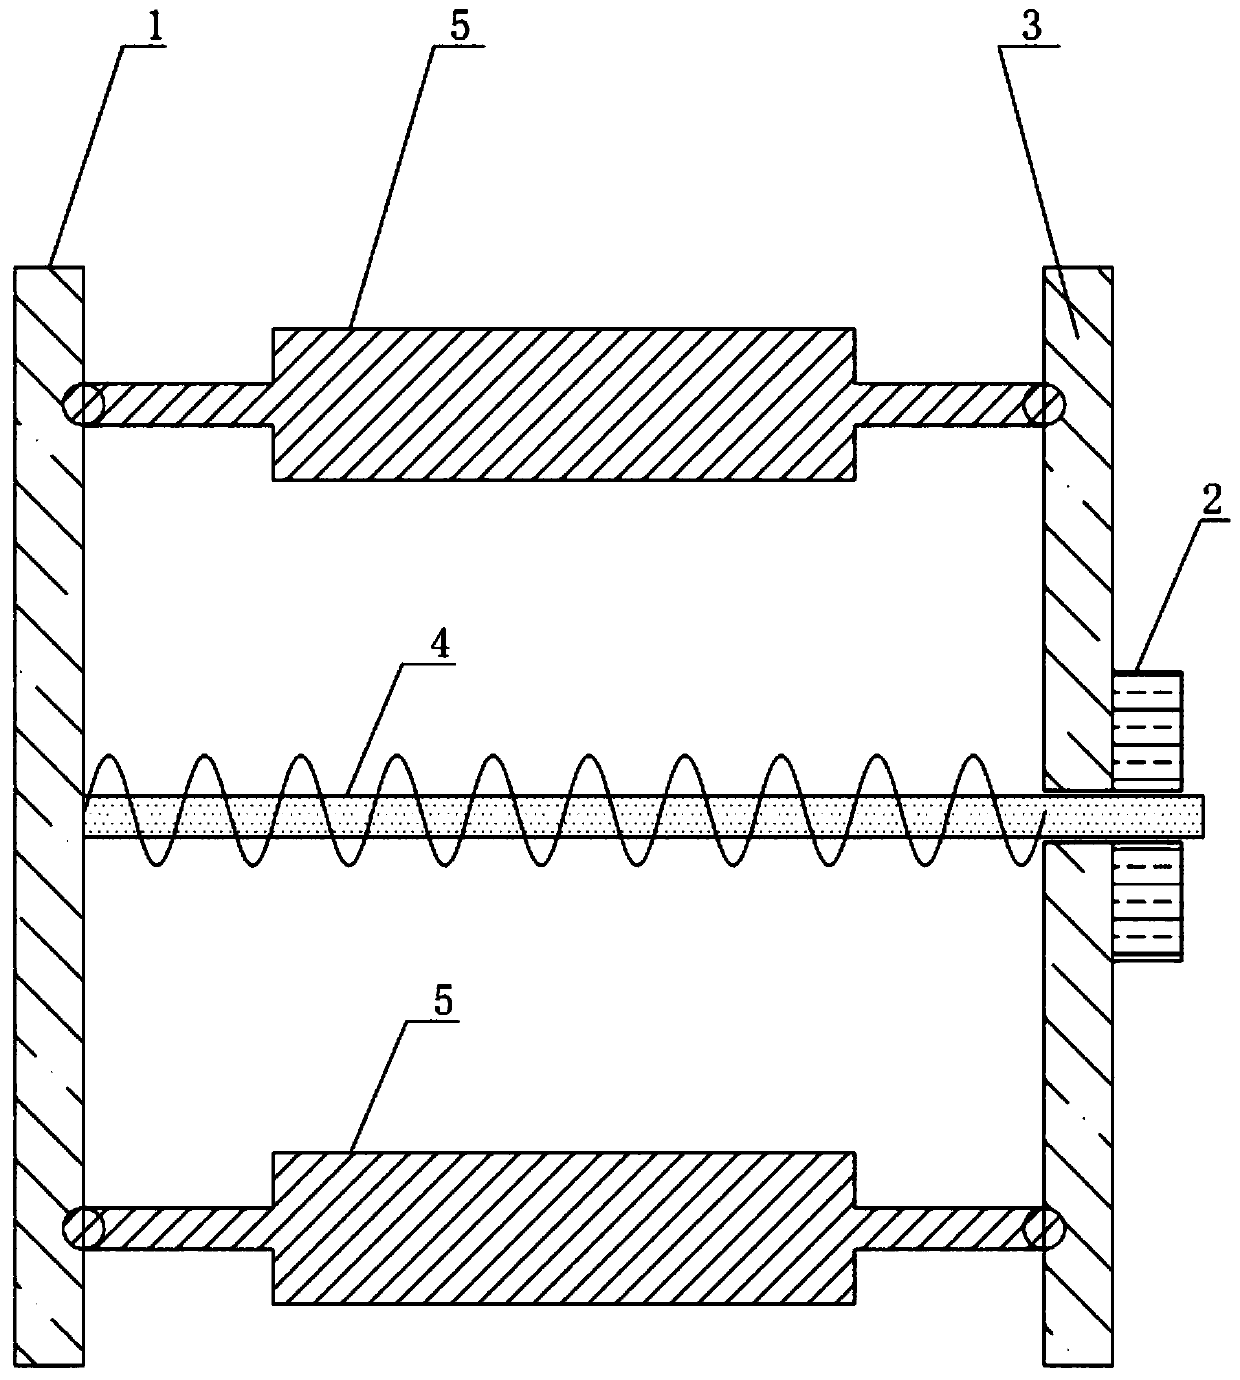 Device for passively slowing relative rotation of ultra-large floating body